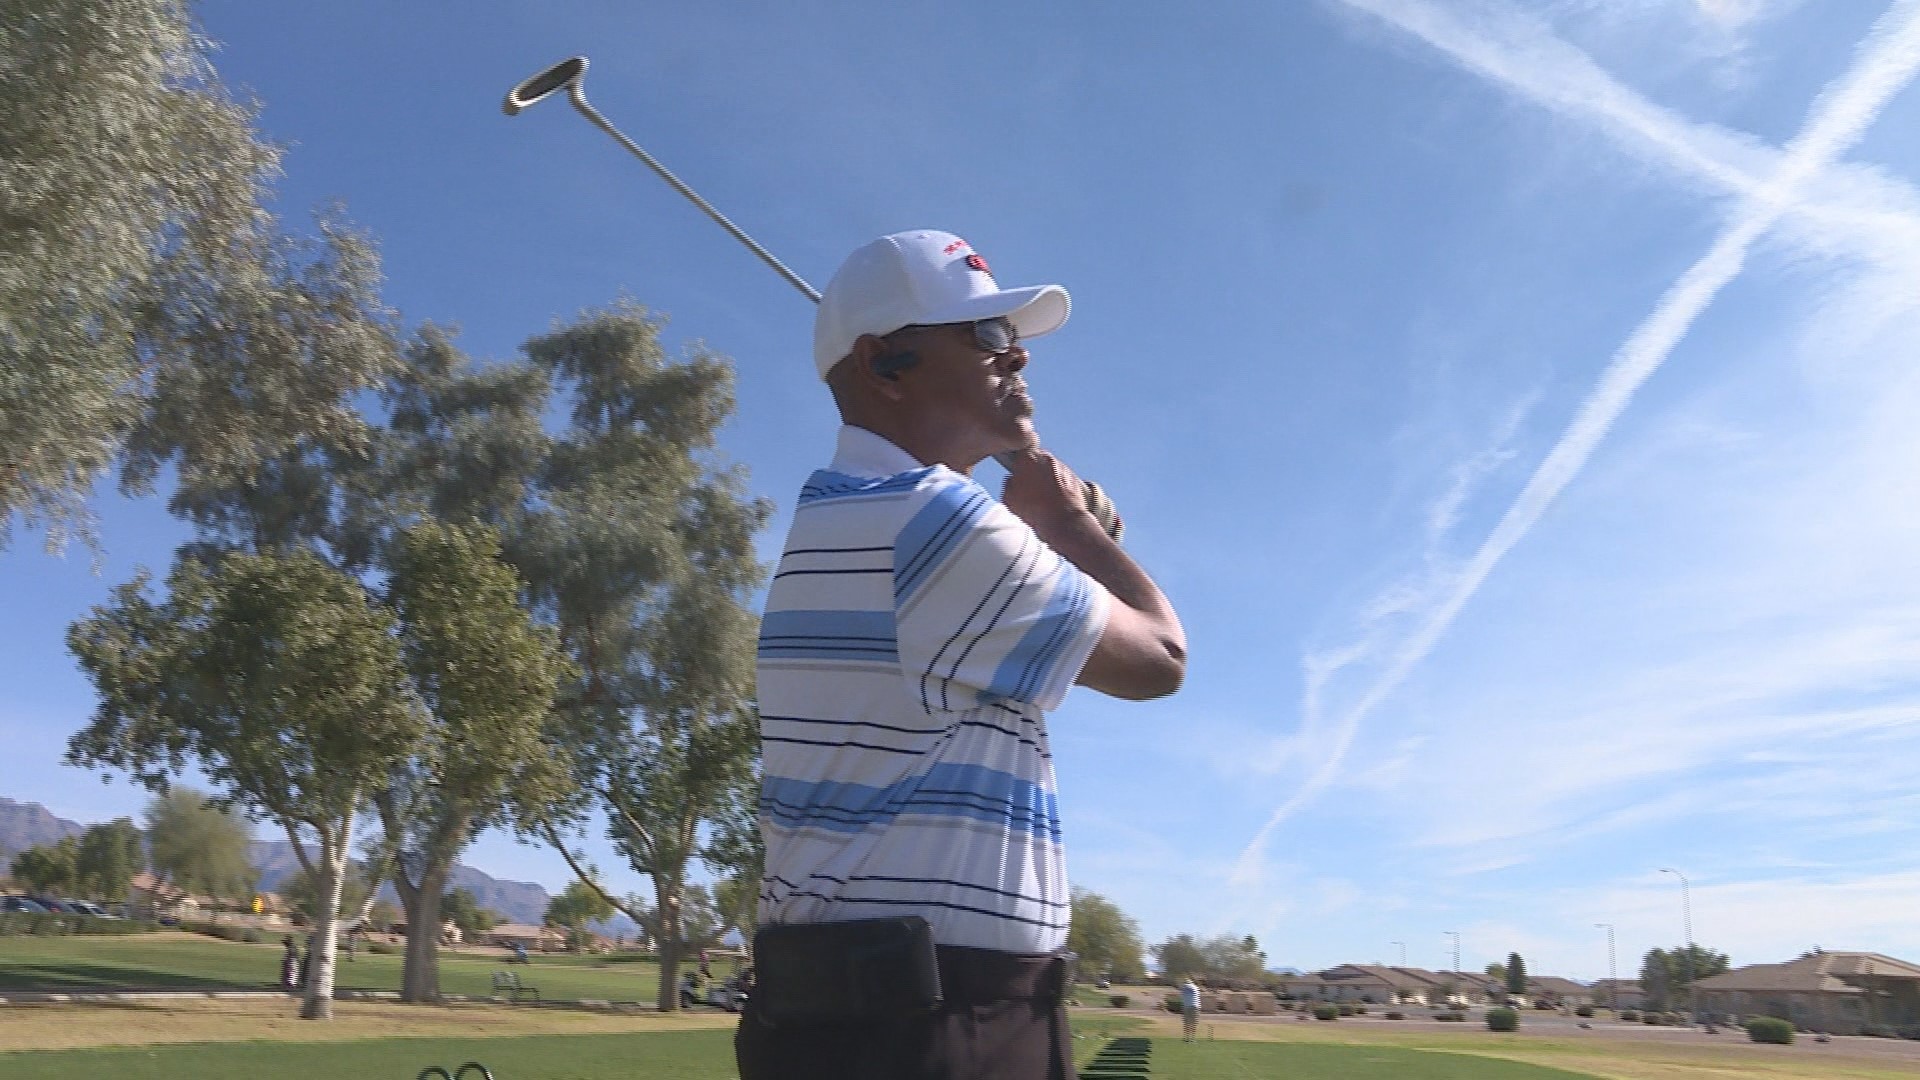 Anthony Griggs is a military veteran who picked up golf to help with his PTSD. He found the game too easy, so now, he only uses a putter and is winning tournaments.